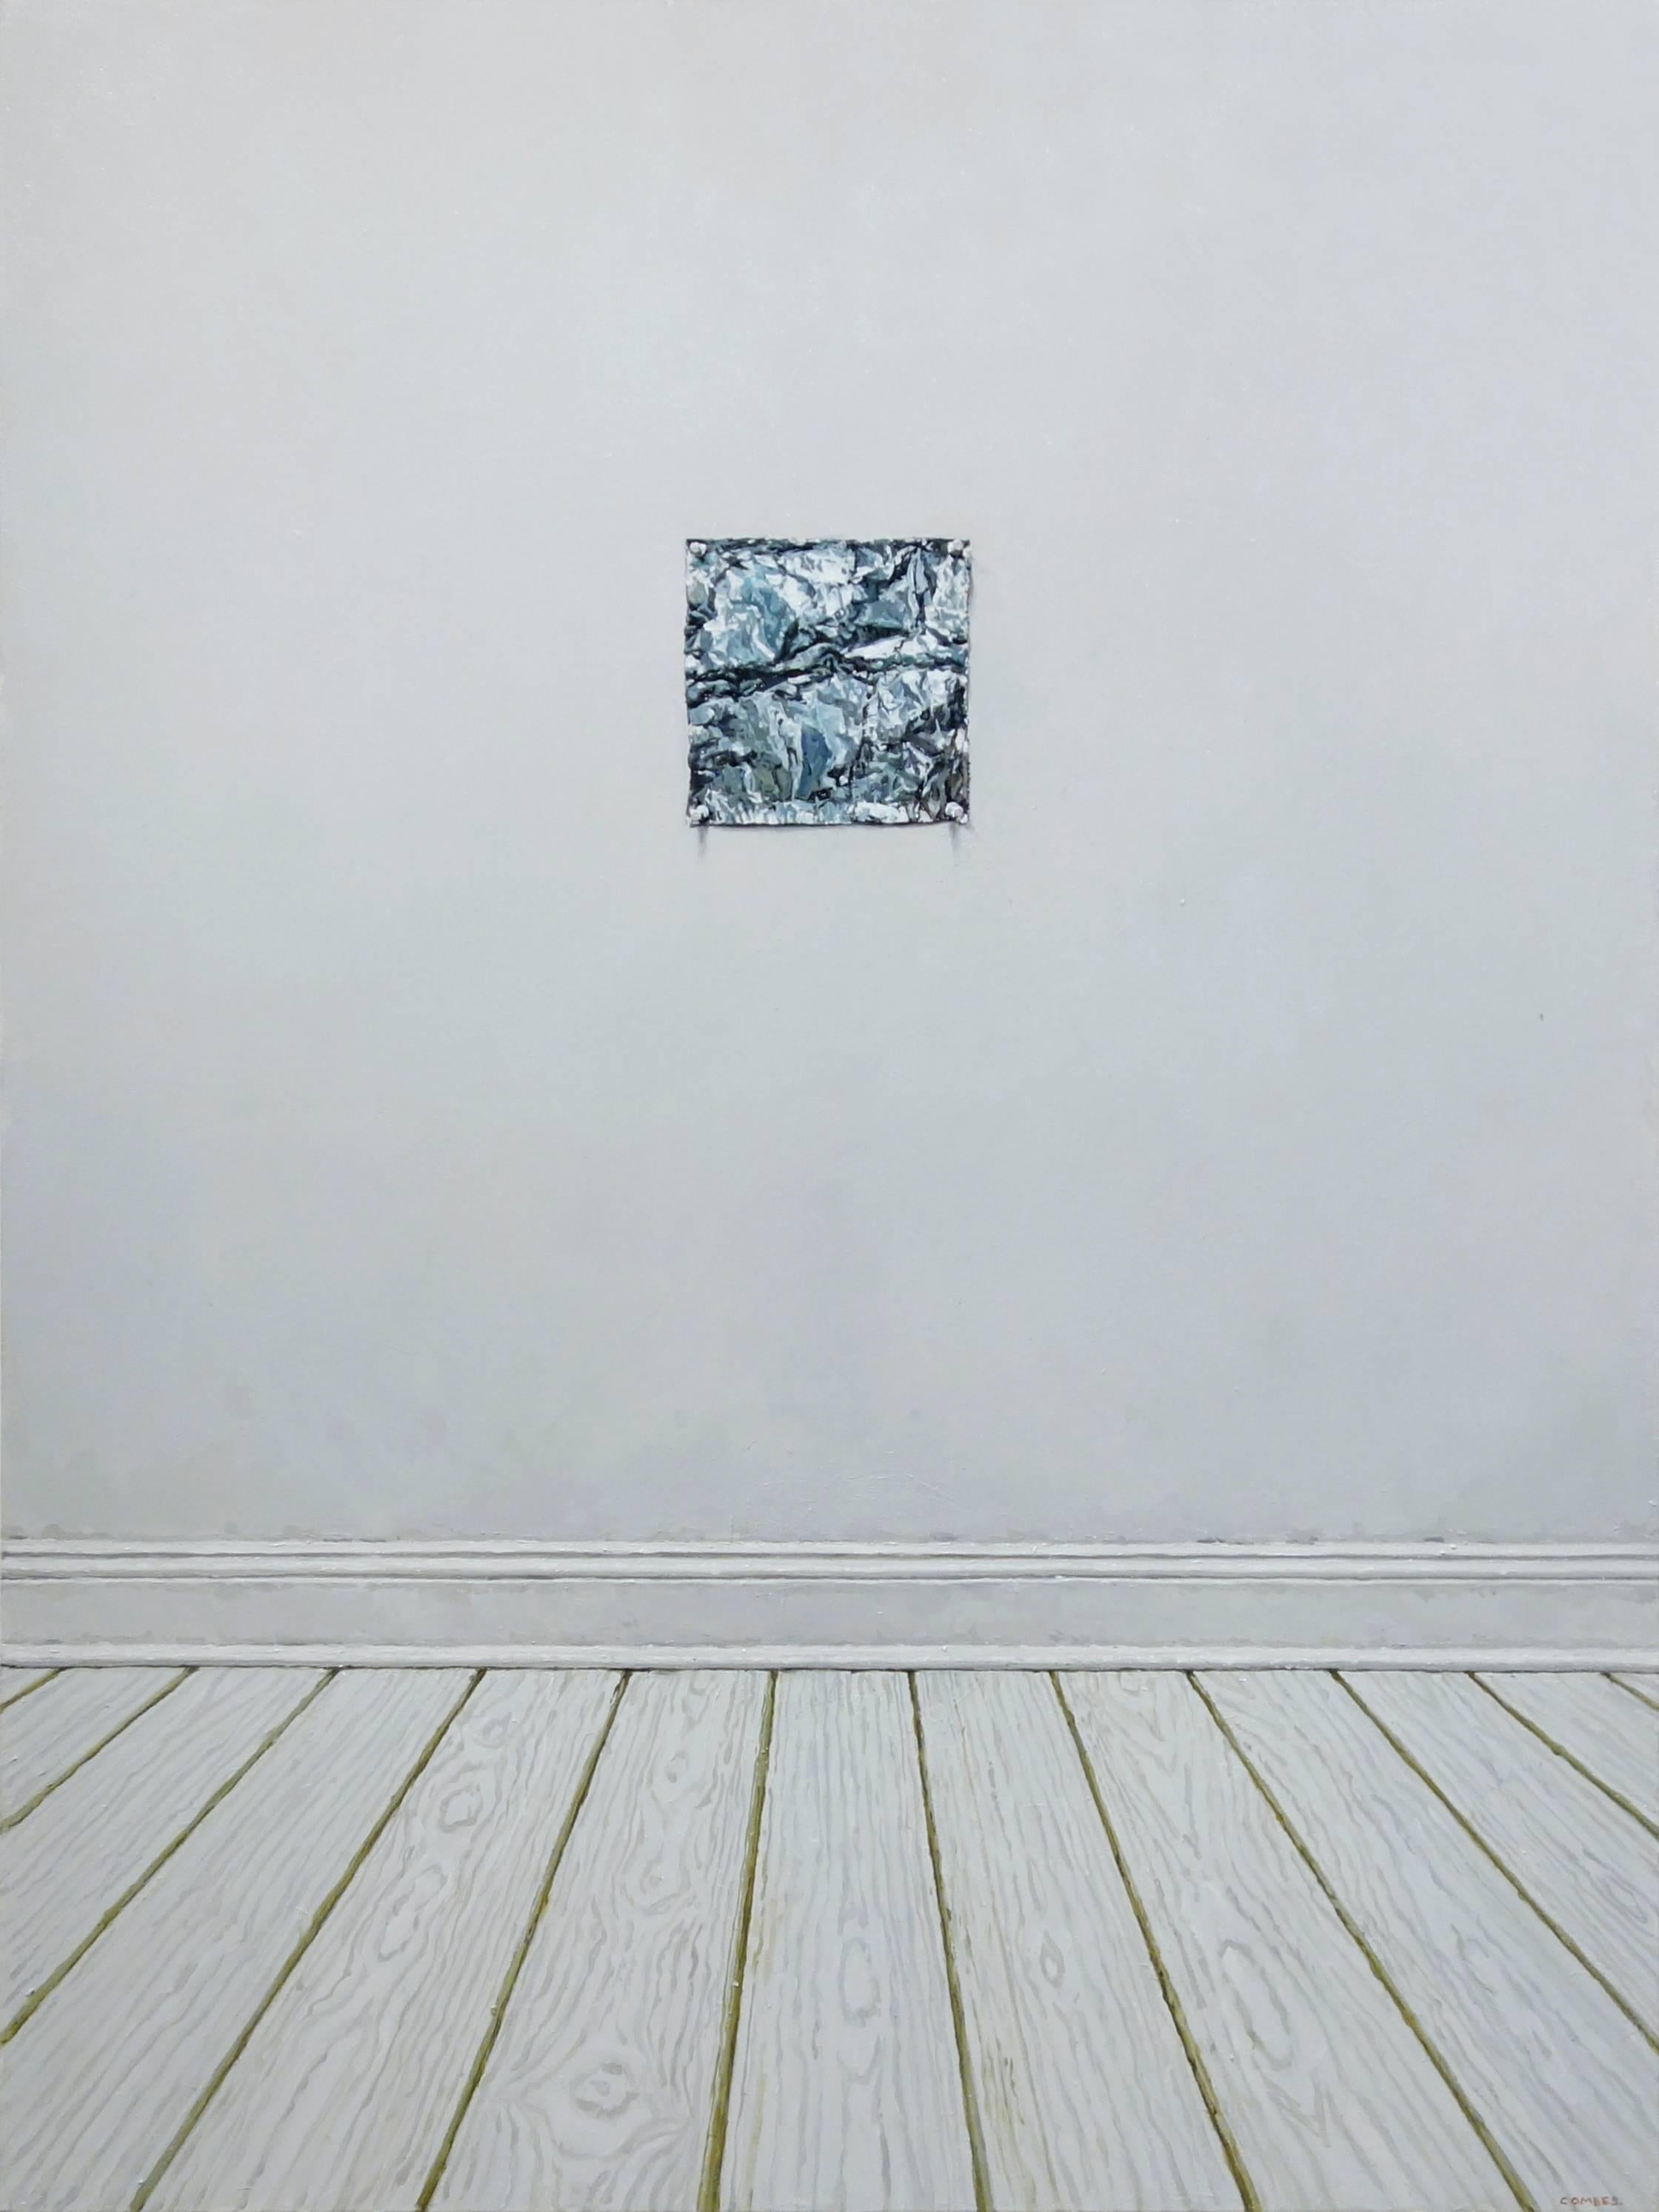 ALUMINUM FOIL PINNED TO A WALL - White wall / Mixed Materials / Still Life - Painting by Richard Combes